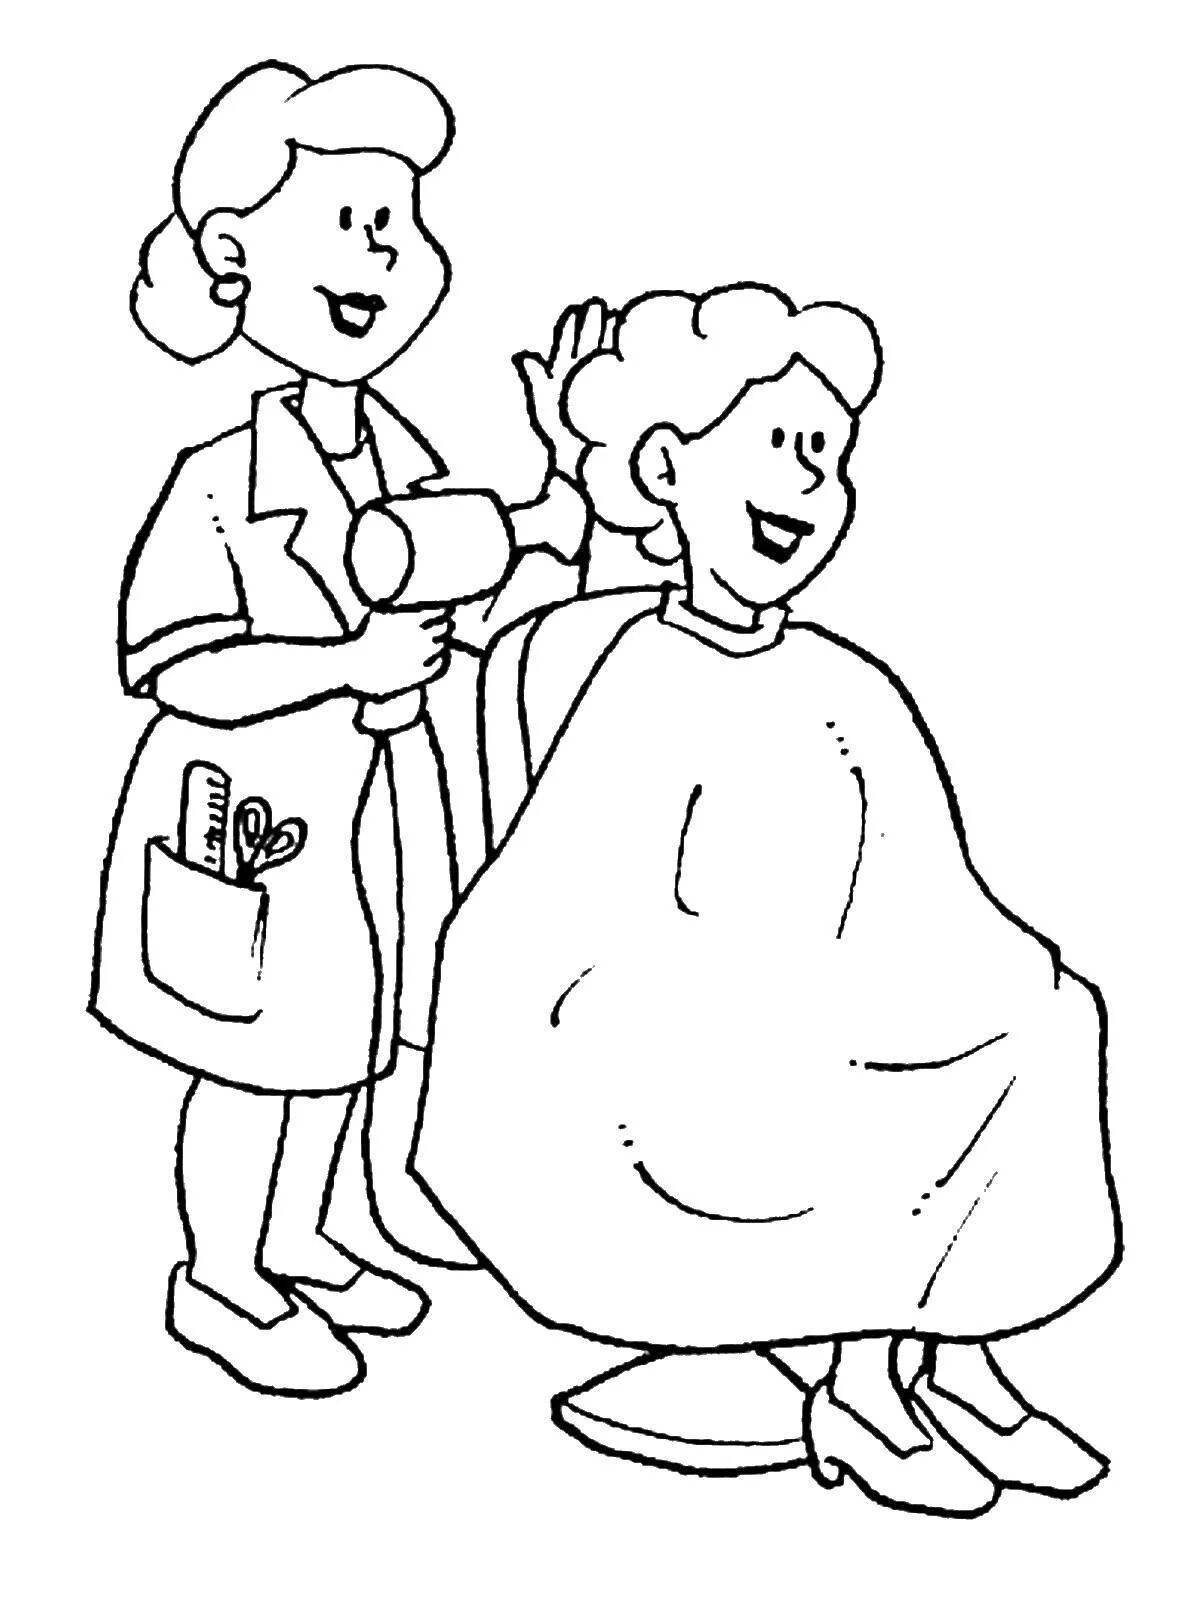 Glorious 1st grade job coloring pages